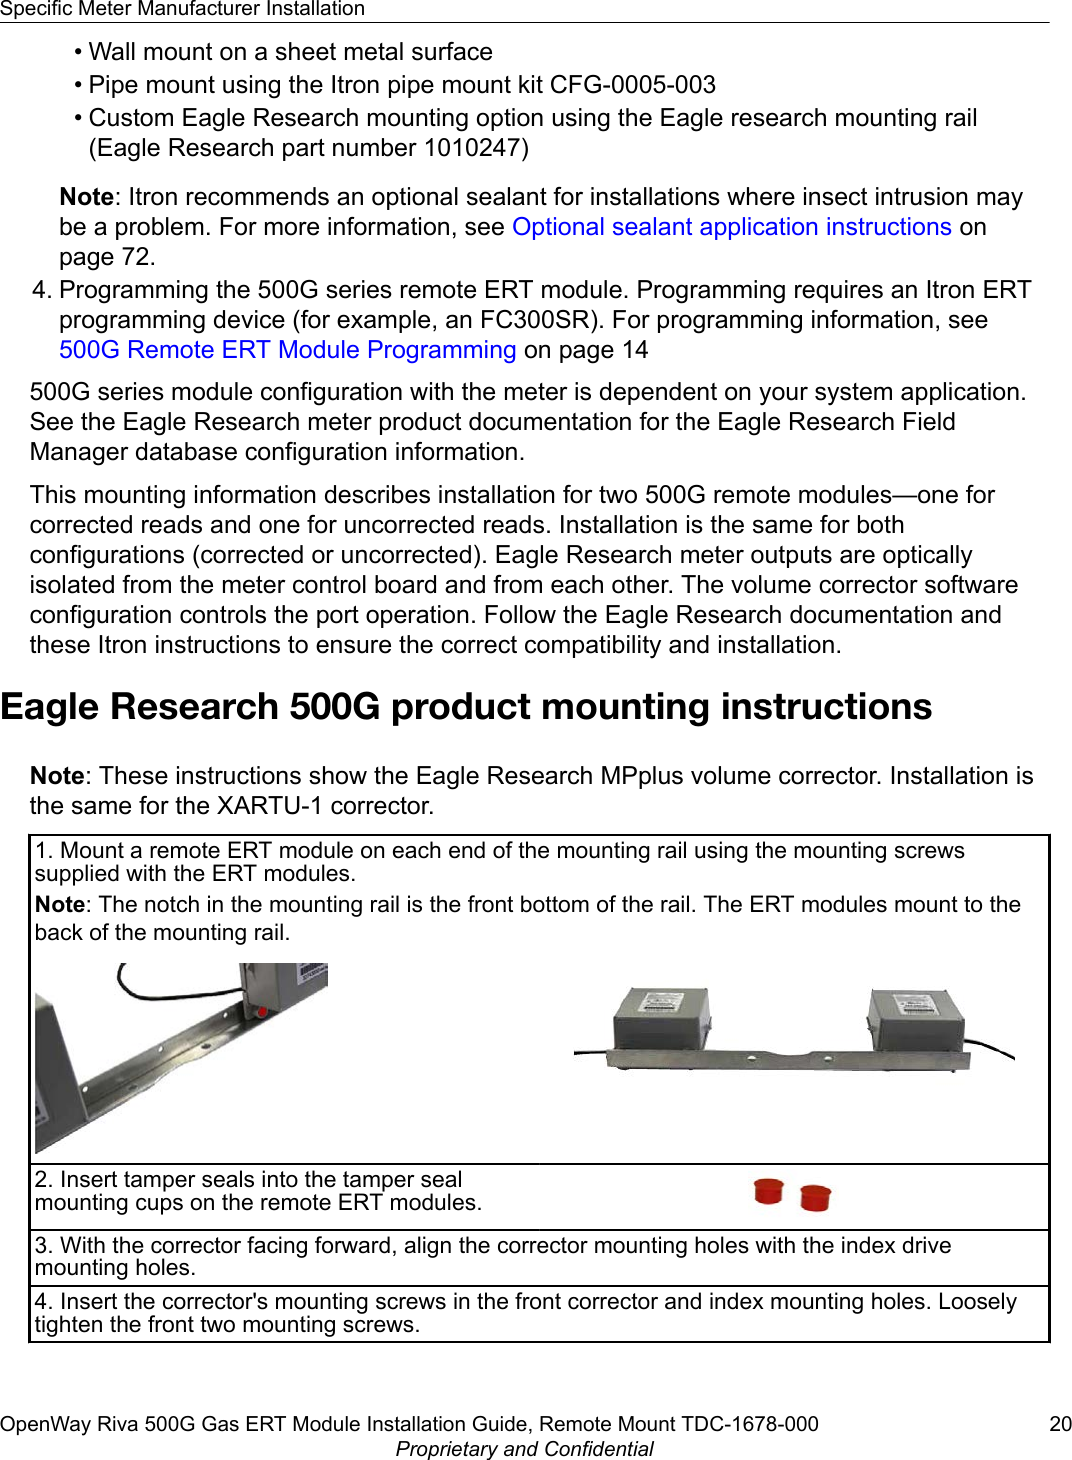 • Wall mount on a sheet metal surface• Pipe mount using the Itron pipe mount kit CFG-0005-003• Custom Eagle Research mounting option using the Eagle research mounting rail(Eagle Research part number 1010247)Note: Itron recommends an optional sealant for installations where insect intrusion maybe a problem. For more information, see Optional sealant application instructions onpage 72.4. Programming the 500G series remote ERT module. Programming requires an Itron ERTprogramming device (for example, an FC300SR). For programming information, see 500G Remote ERT Module Programming on page 14500G series module configuration with the meter is dependent on your system application.See the Eagle Research meter product documentation for the Eagle Research FieldManager database configuration information.This mounting information describes installation for two 500G remote modules—one forcorrected reads and one for uncorrected reads. Installation is the same for bothconfigurations (corrected or uncorrected). Eagle Research meter outputs are opticallyisolated from the meter control board and from each other. The volume corrector softwareconfiguration controls the port operation. Follow the Eagle Research documentation andthese Itron instructions to ensure the correct compatibility and installation.Eagle Research 500G product mounting instructionsNote: These instructions show the Eagle Research MPplus volume corrector. Installation isthe same for the XARTU-1 corrector.1. Mount a remote ERT module on each end of the mounting rail using the mounting screwssupplied with the ERT modules.Note: The notch in the mounting rail is the front bottom of the rail. The ERT modules mount to theback of the mounting rail.2. Insert tamper seals into the tamper sealmounting cups on the remote ERT modules.3. With the corrector facing forward, align the corrector mounting holes with the index drivemounting holes.4. Insert the corrector&apos;s mounting screws in the front corrector and index mounting holes. Looselytighten the front two mounting screws.Specific Meter Manufacturer InstallationOpenWay Riva 500G Gas ERT Module Installation Guide, Remote Mount TDC-1678-000 20Proprietary and Confidential